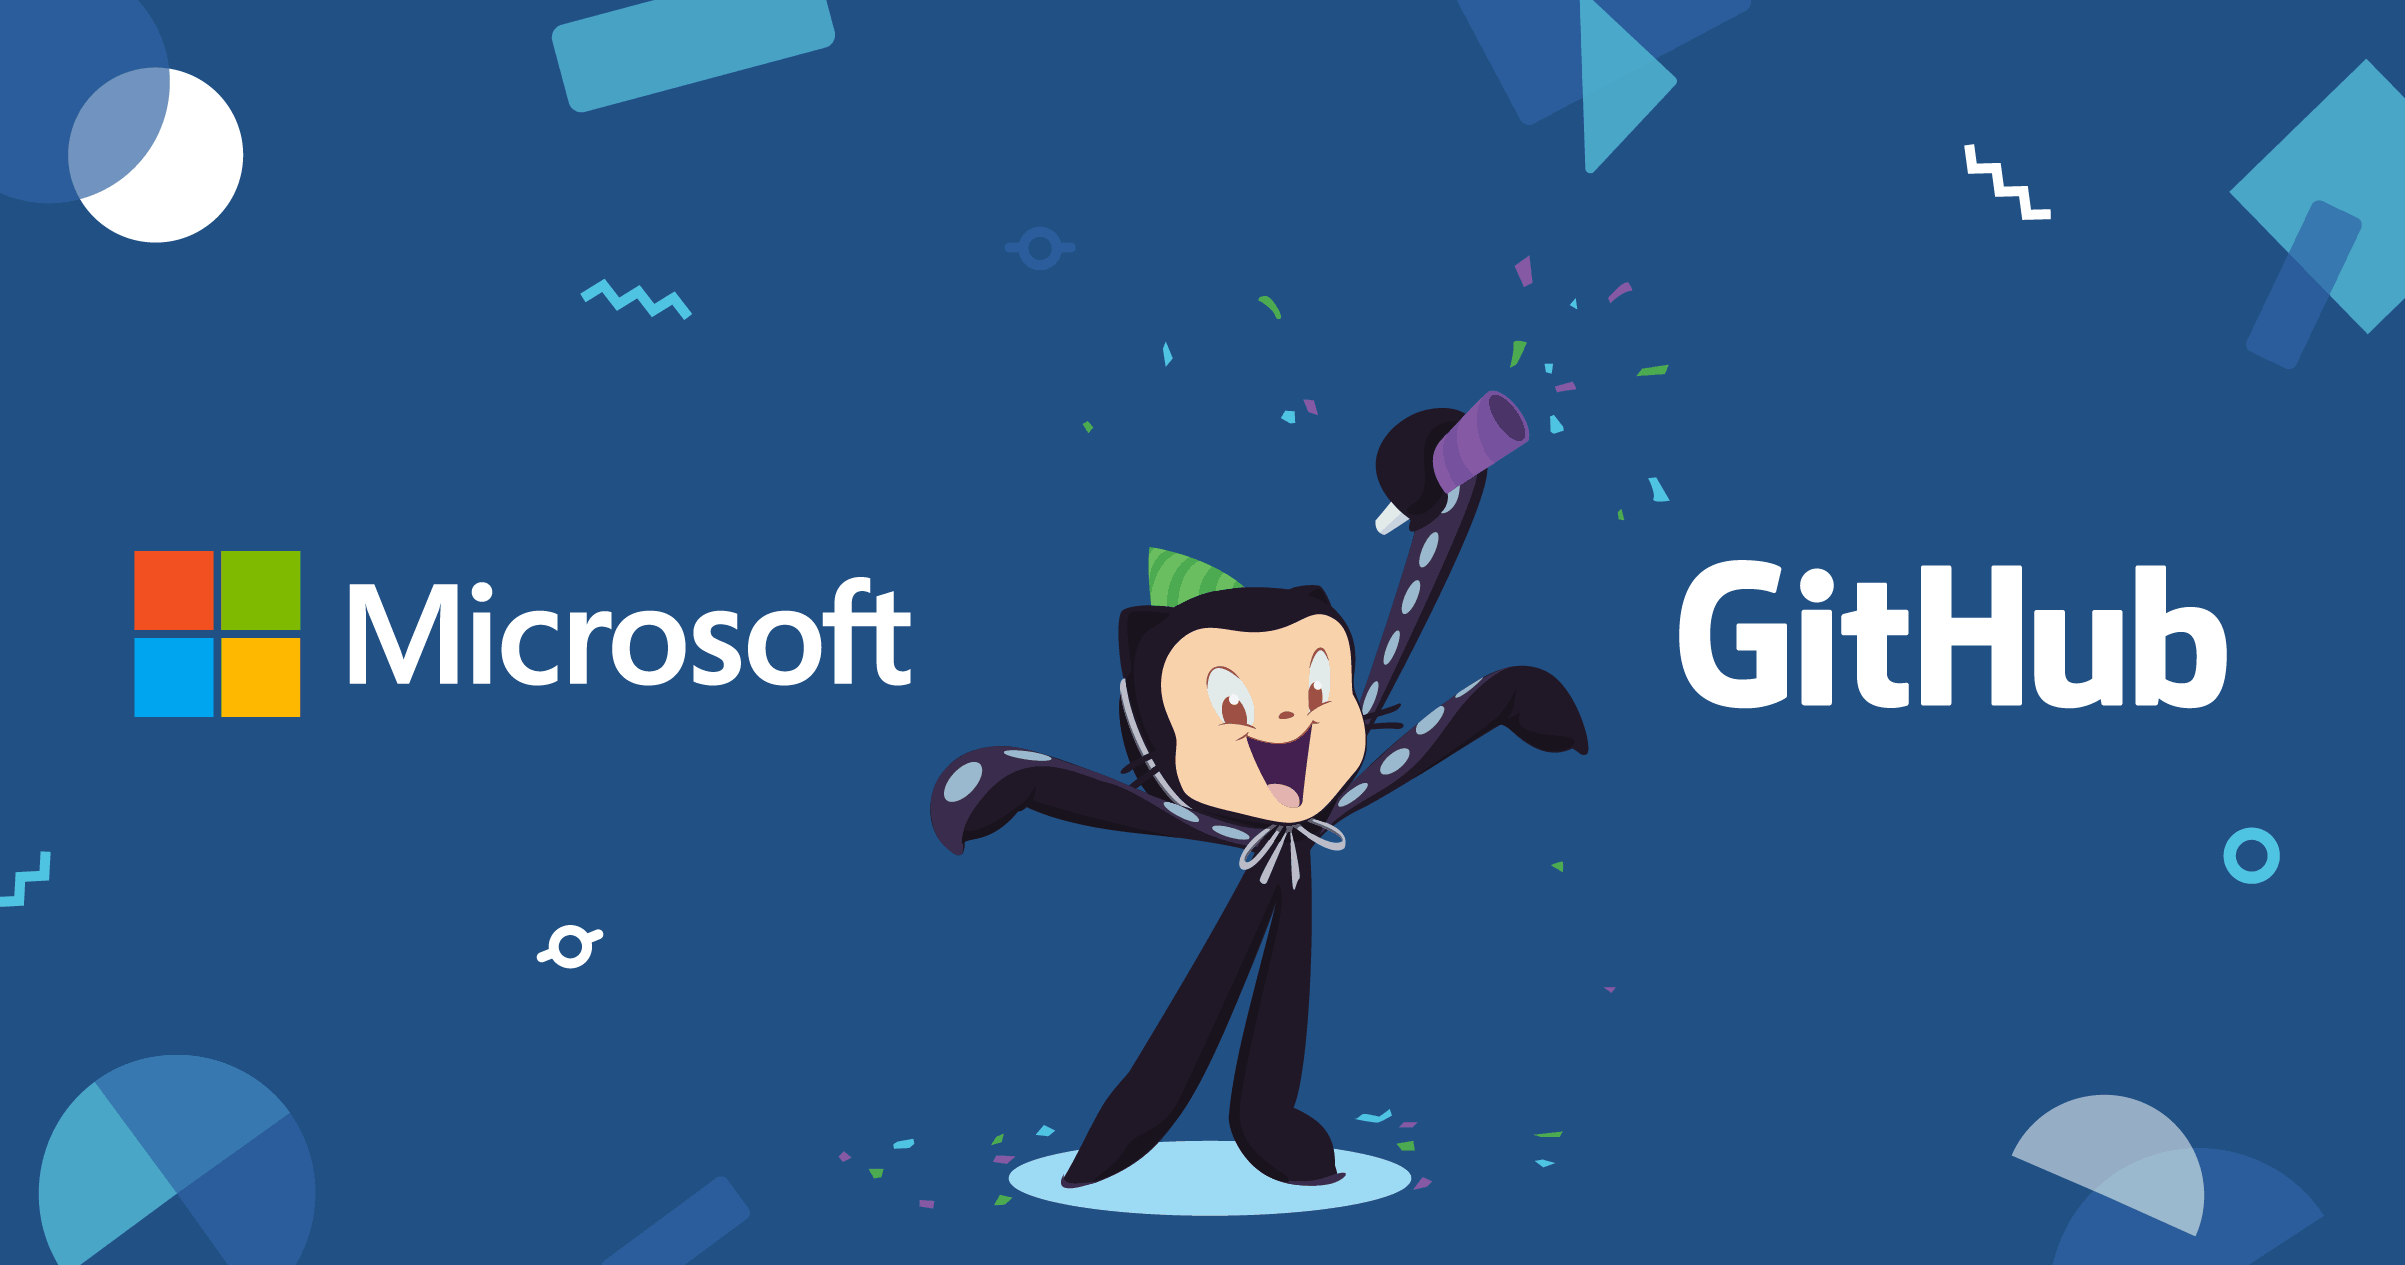 GitHub introduces Sponsors, a way for open source developers to get paid, with Matching Funds up to $5,000 - OnMSFT.com - May 23, 2019